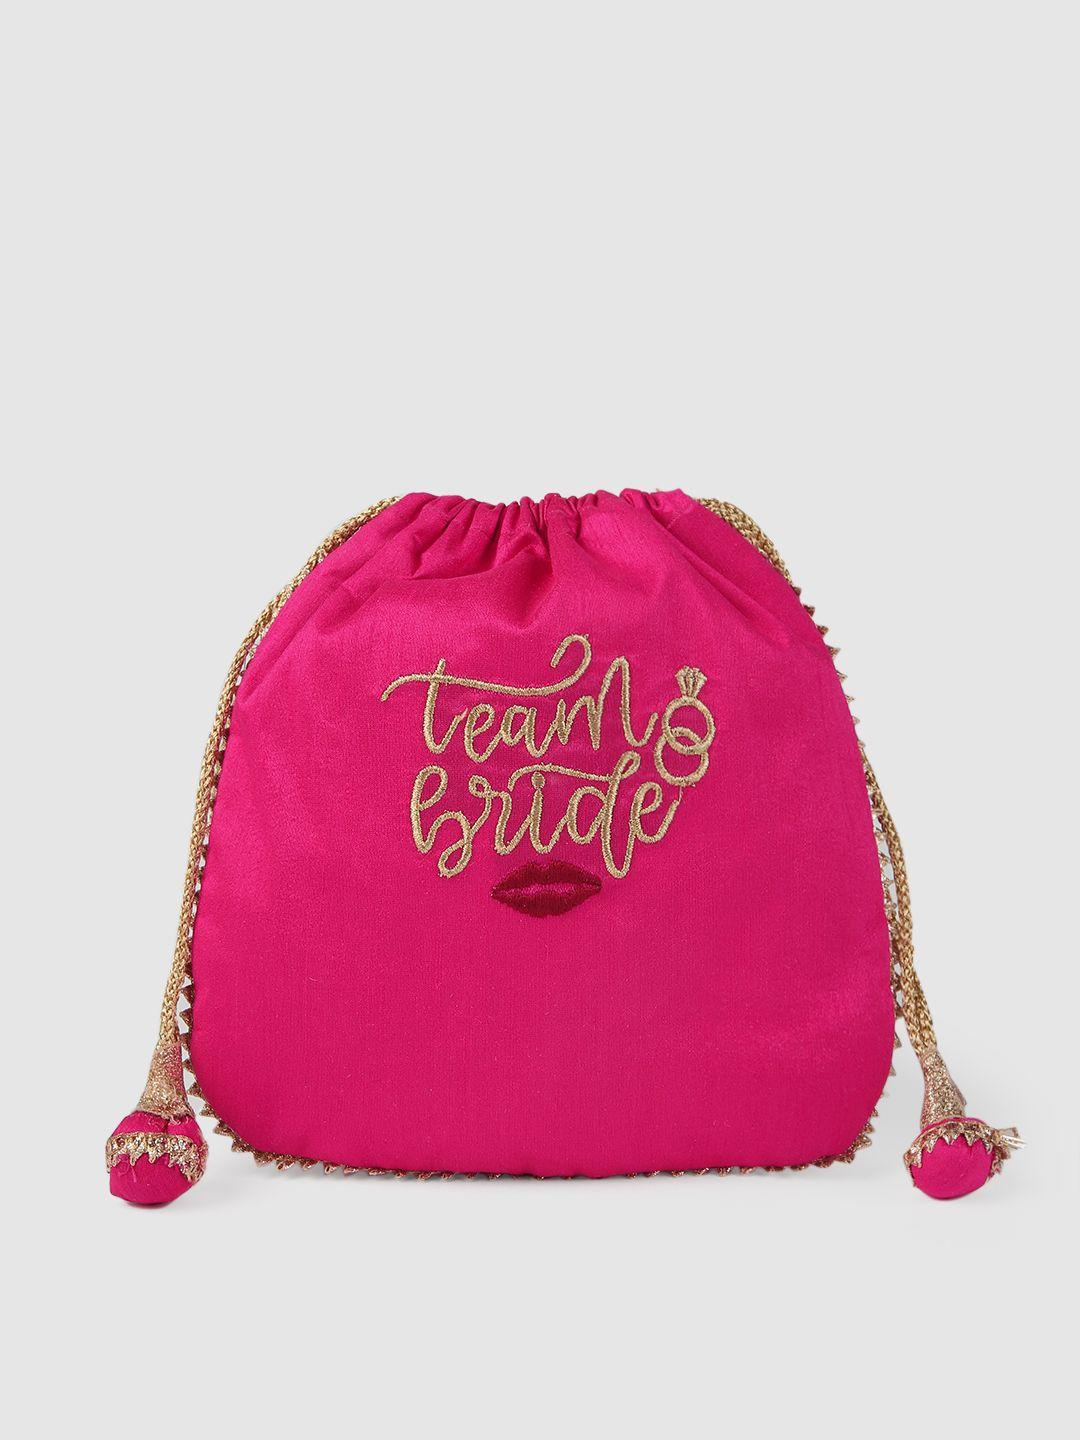 accessher pink embroidered potli clutch